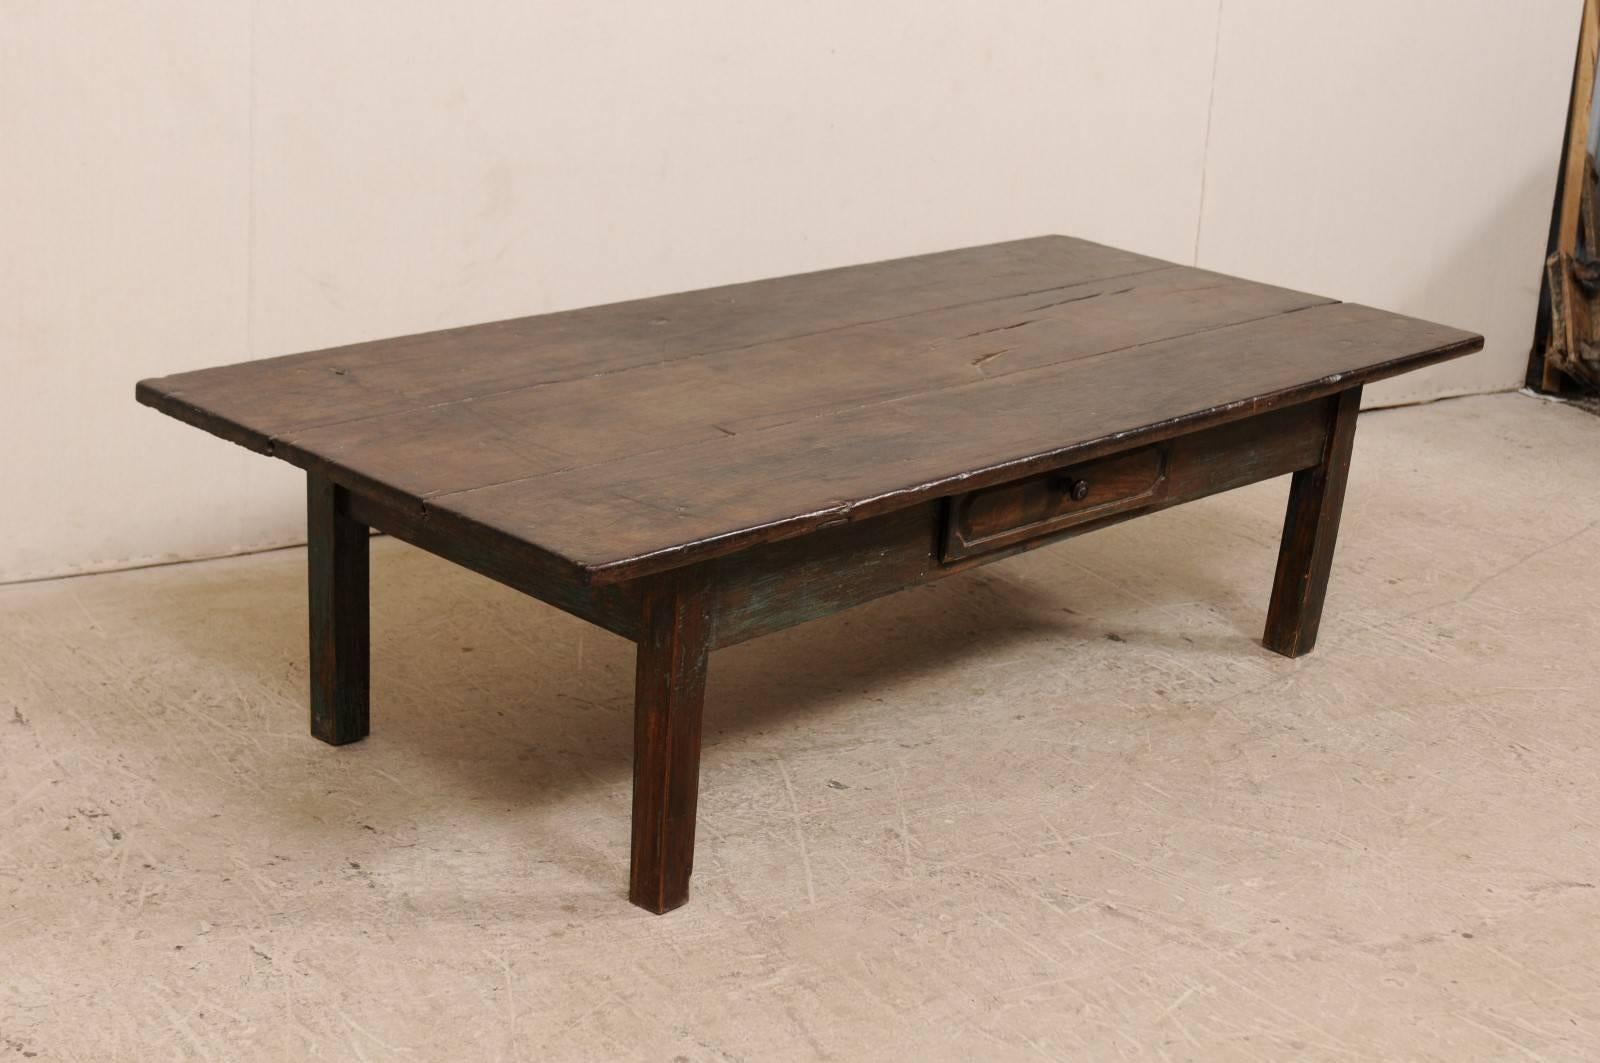 19th Century Brazilian Rustic Carved Peroba Wood Coffee Table with Single Drawer 2